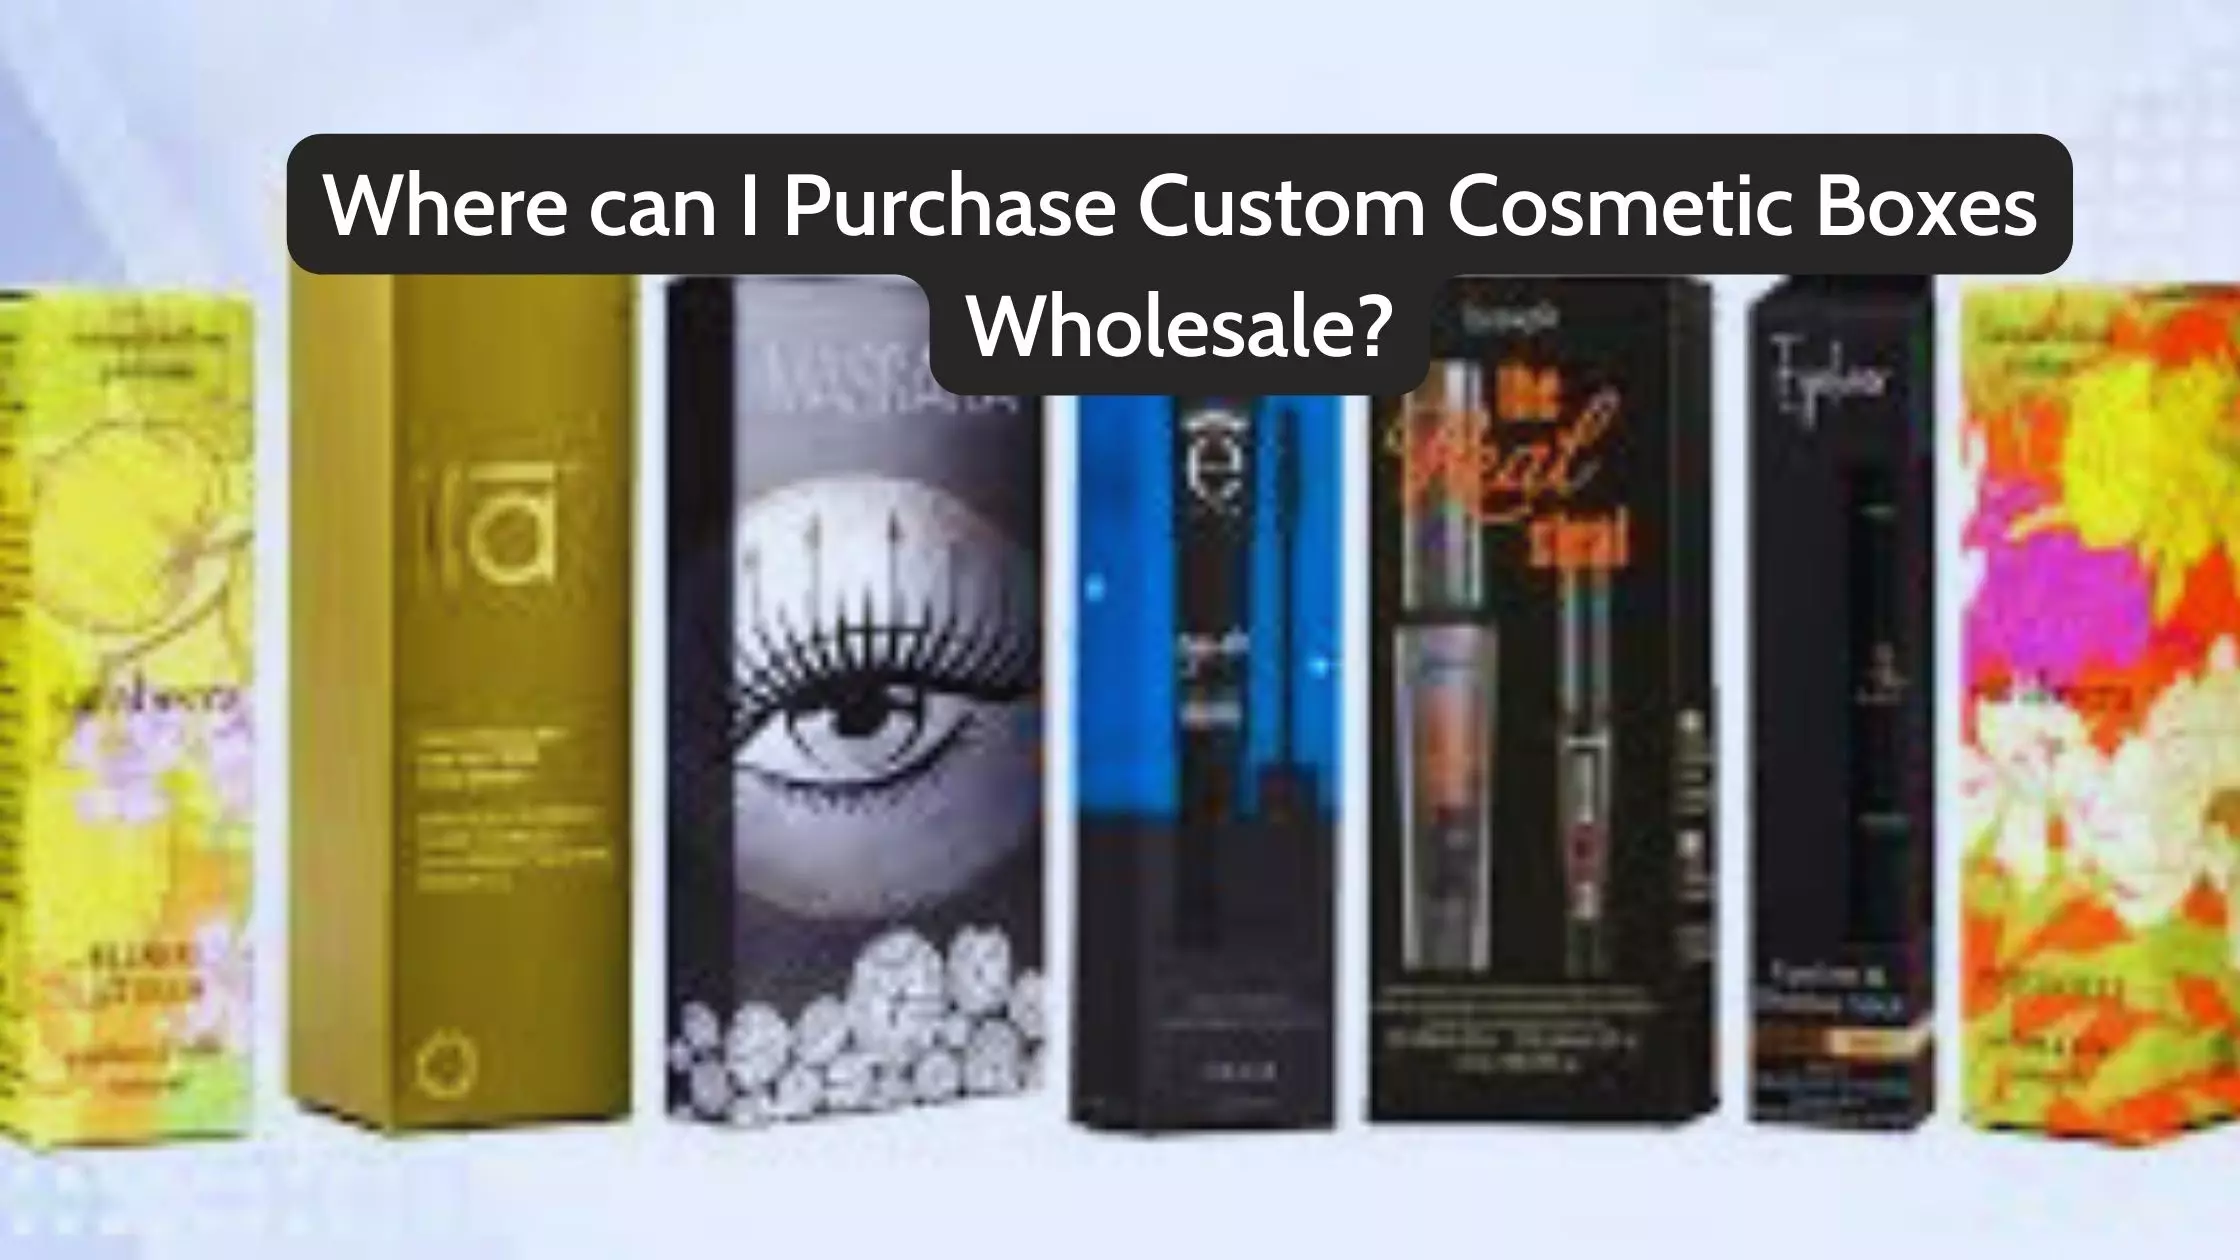 Where can I Purchase Custom Cosmetic Boxes Wholesale